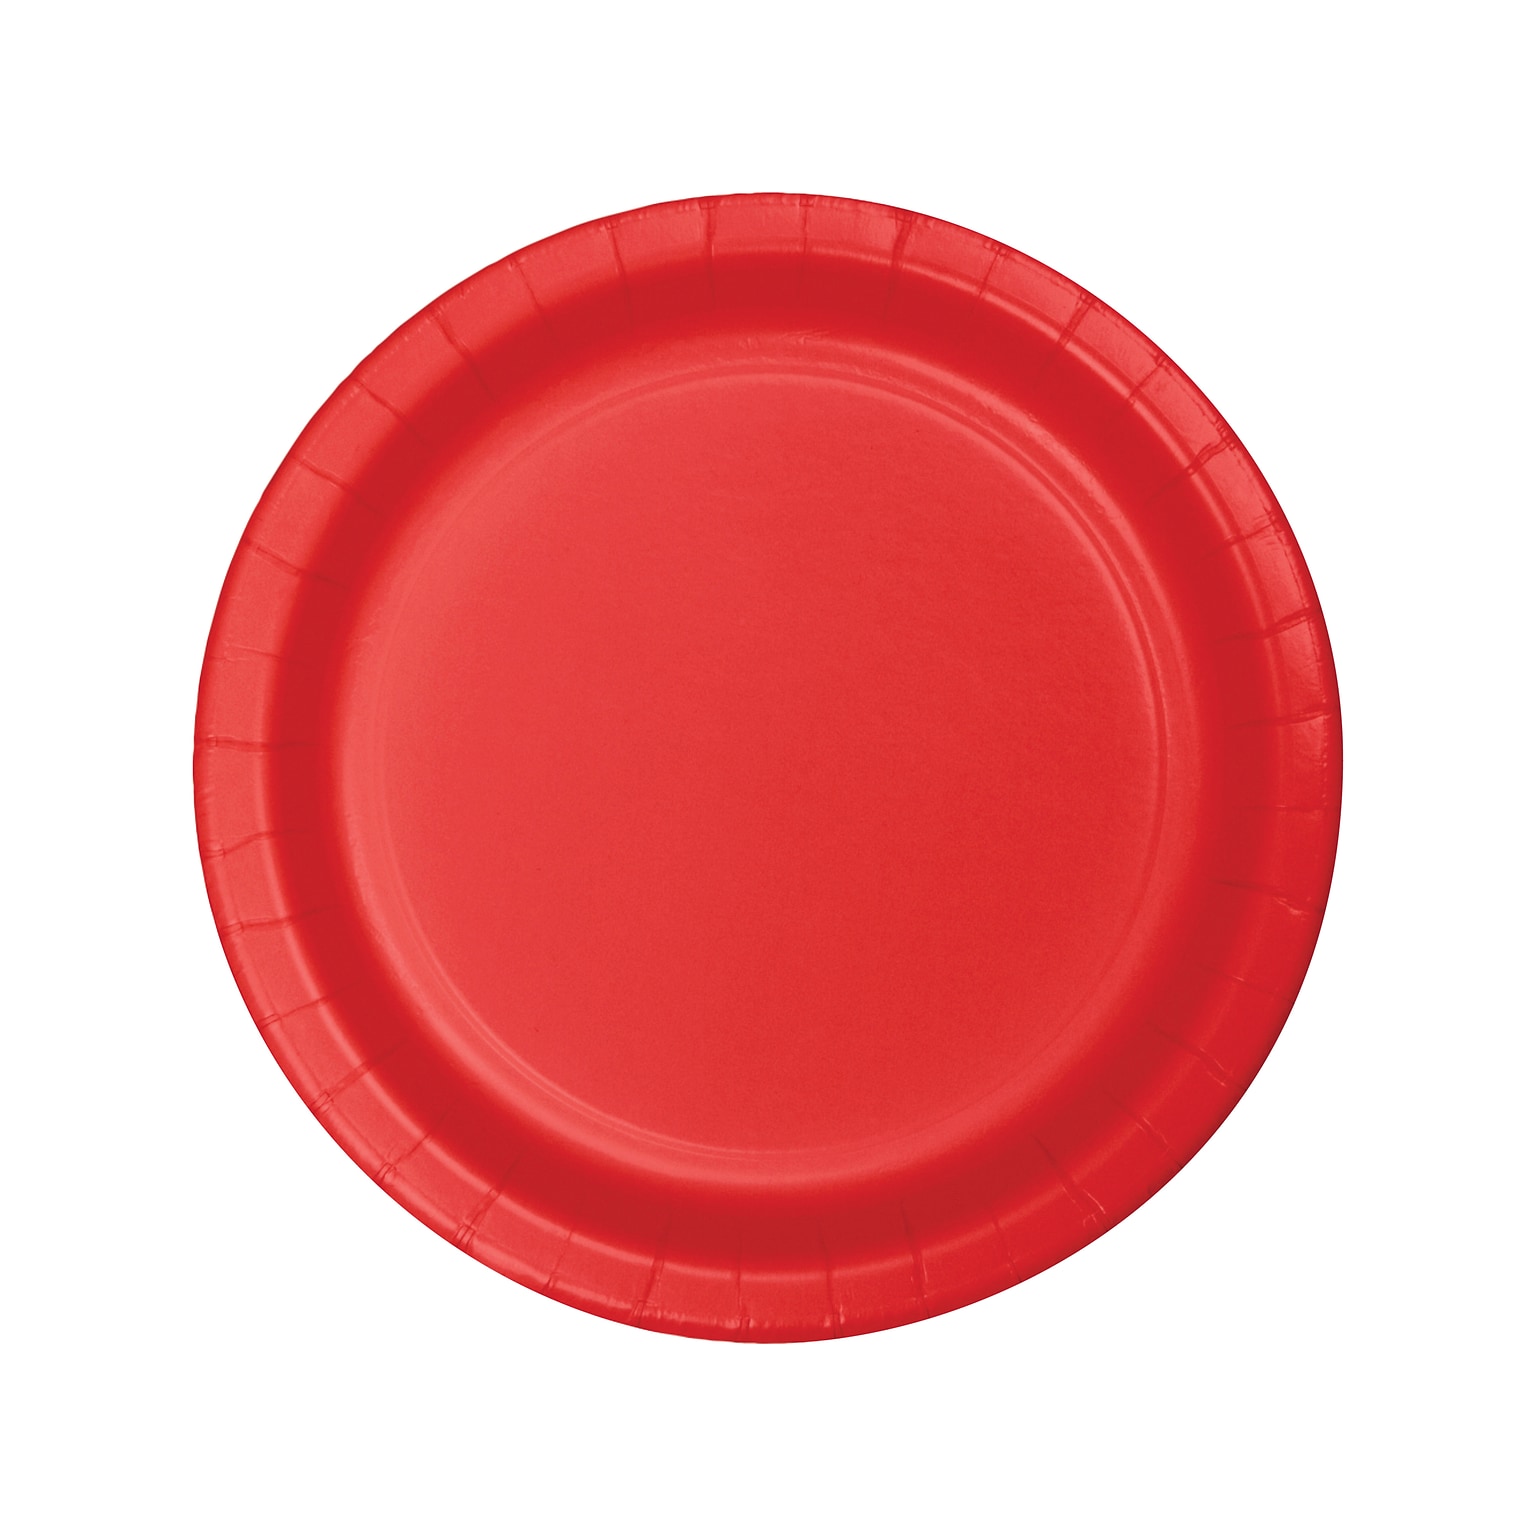 Creative Converting Touch of Color 9 Paper Dinner Plate, Classic Red, 72 Plates/Pack (DTC471031BDPLT)